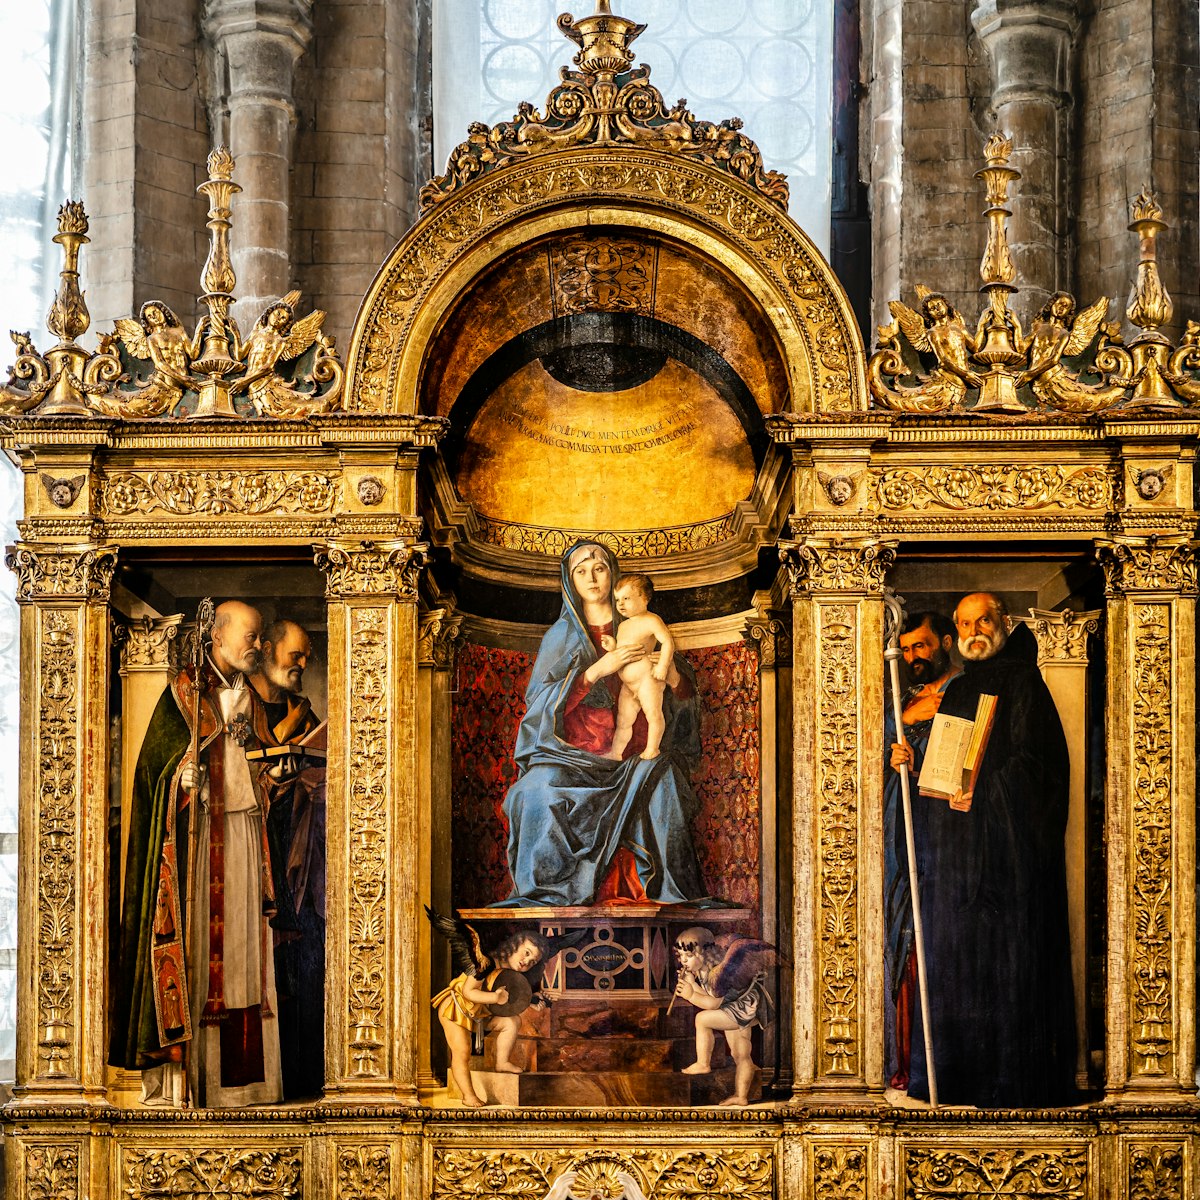 Venice, Italy - November 2022: Madonna with child and saints; Frari triptych painting by Giovanni Bellini from 1488 in the Sacristy altar - Pesaro's Chapel inside the Basilica of Santa Maria Gloriosa dei Frari, Glorious St. Mary of Frari
1487677718
nicholas, peter, saint benedict, saint peter, heritage, mark, saint nicholas, frari, saint mary, madonna, madonna with child, st. mark, st. benedict, sacristy, saint mark, giovanni bellini, benedict